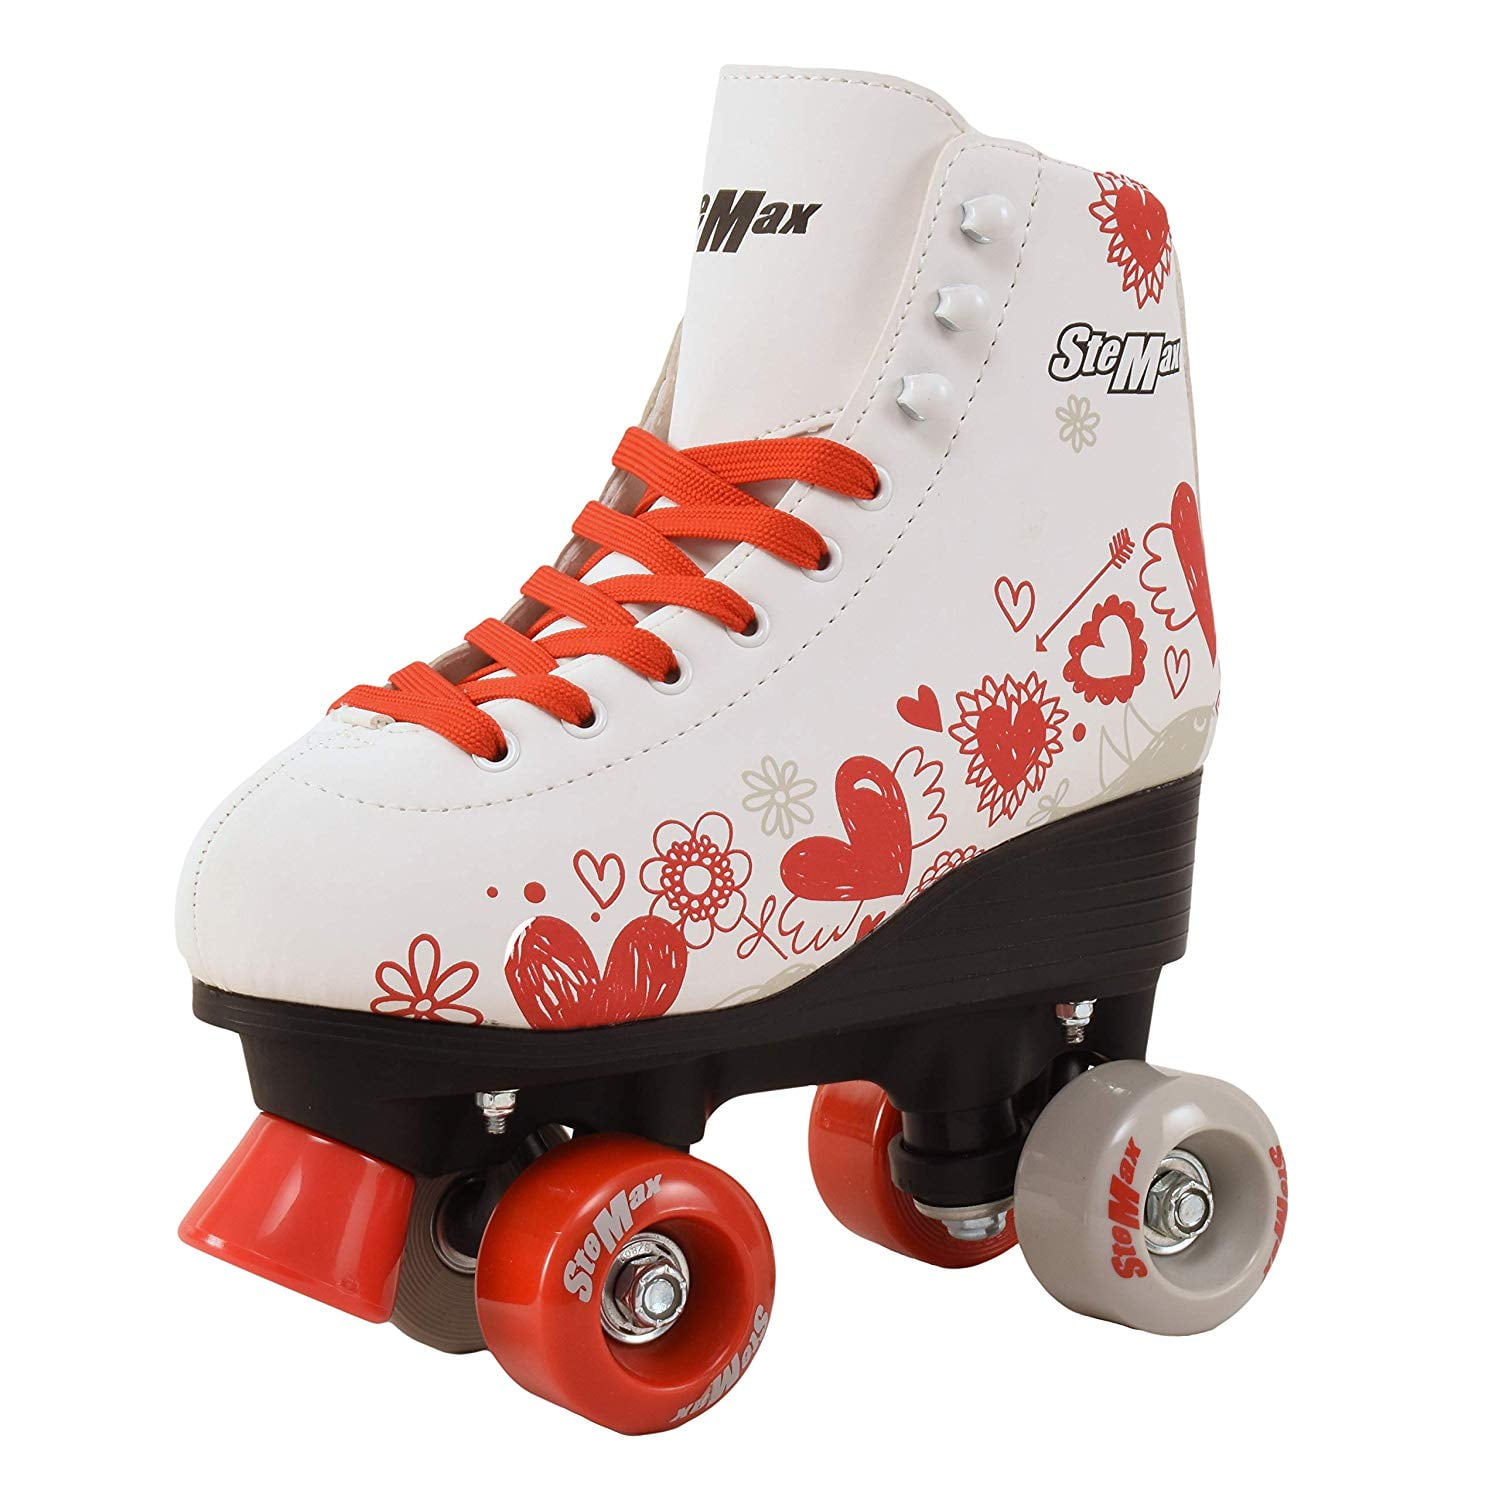 Quad Roller Skates for Girls and Women Size 4 Adult White and pink Heart Derby 